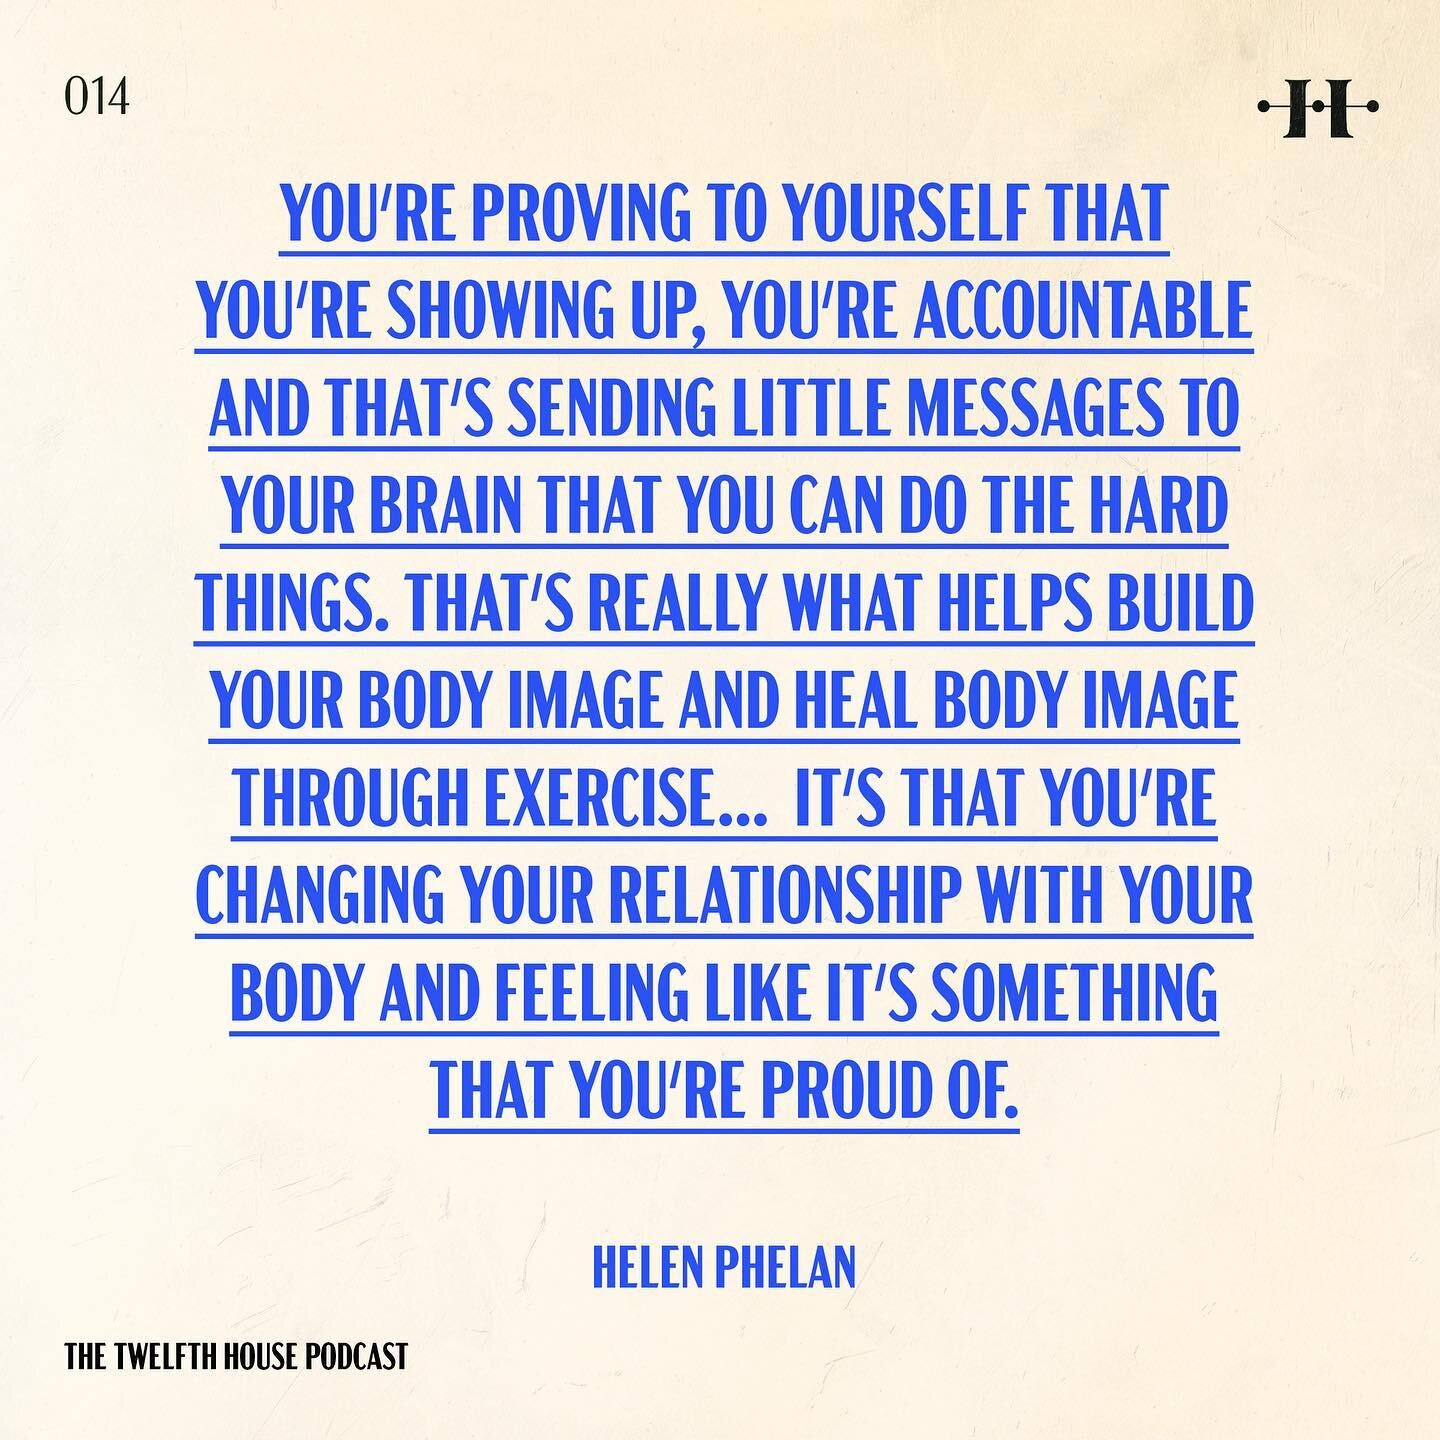 NEW YEAR SAME YOU 🥰

We chat with @helenvphelan on @thetwelfthhousepod today about body neutrality, the linked between intuition and exercise, and how to navigate this time of year (aka resolution mayhem) with presence and consciousness.

Listen on 